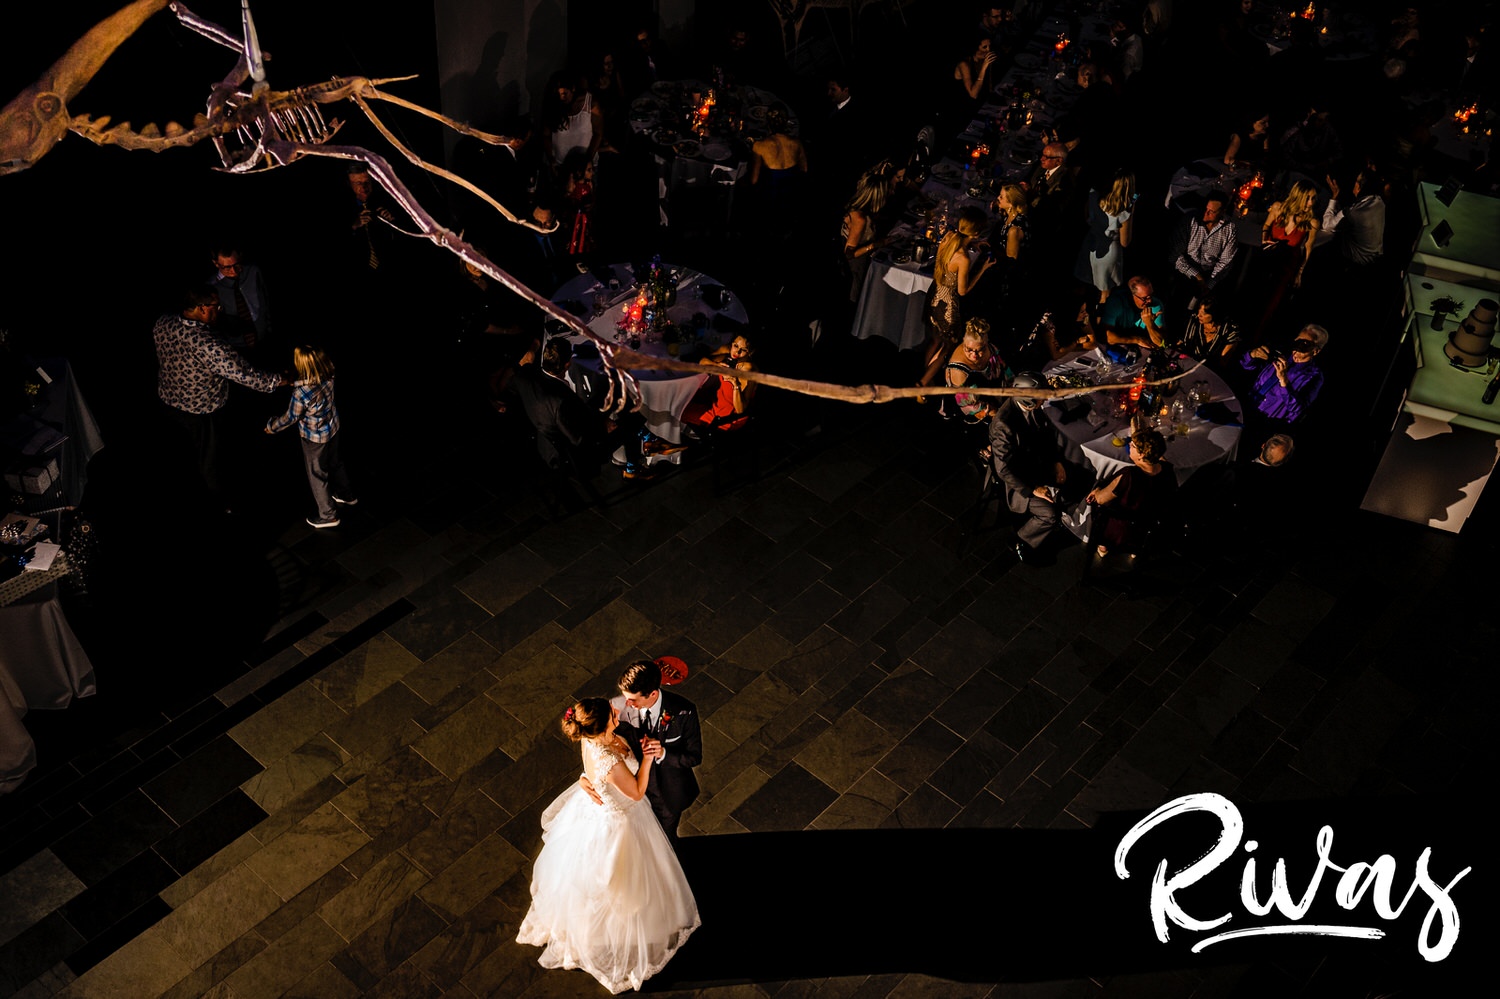 A candid picture taken from a balcony looking down of a bride and groom sharing their first dance during their wedding reception at The Museum at Prairiefire in Kansas City. 